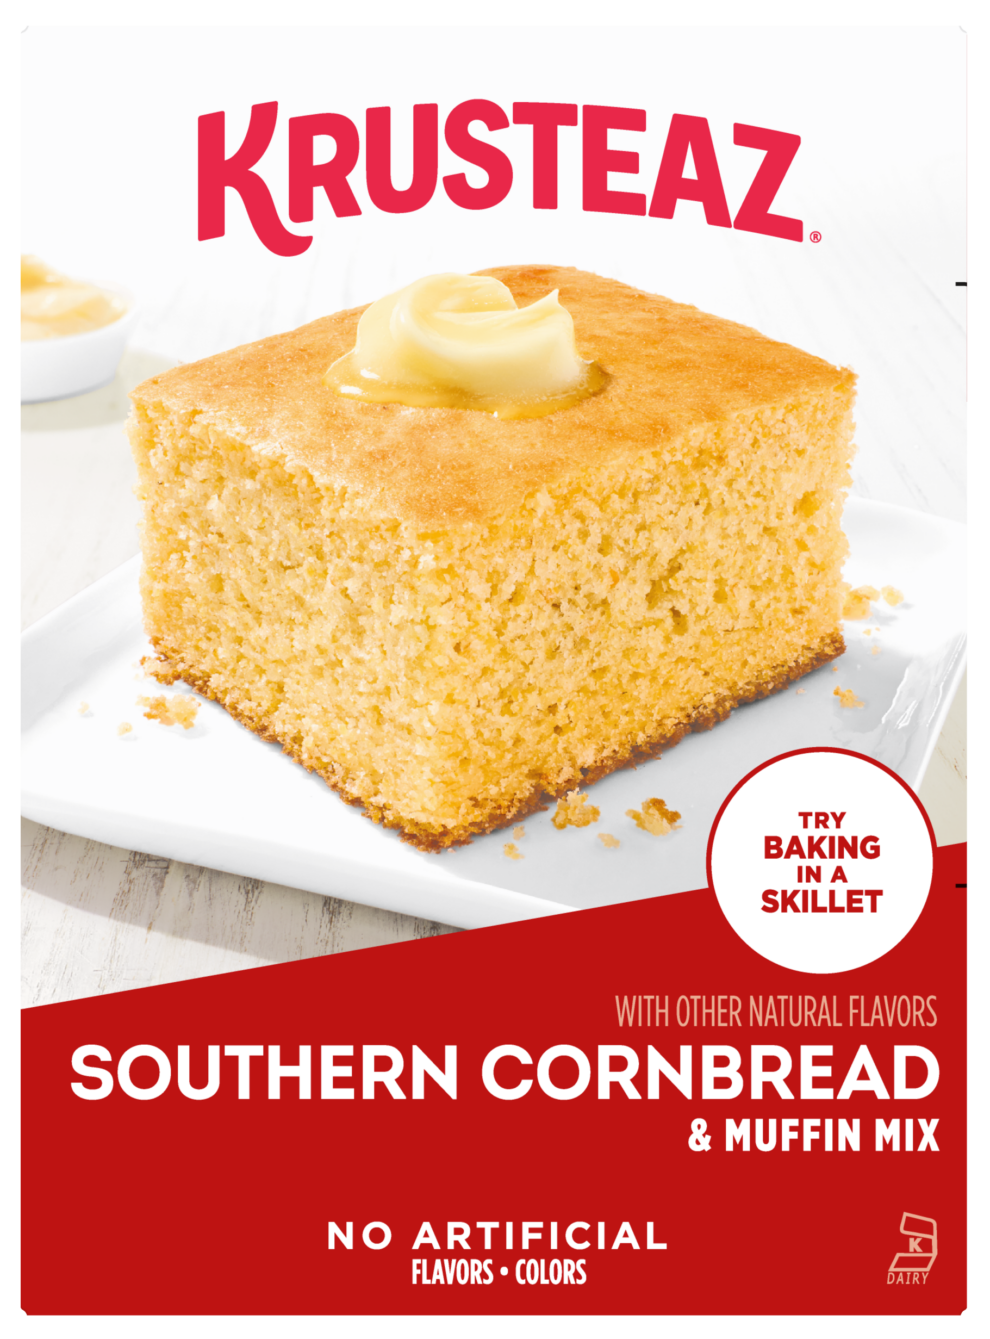 A box of Krusteaz Southern Cornbread and Muffin Mix.